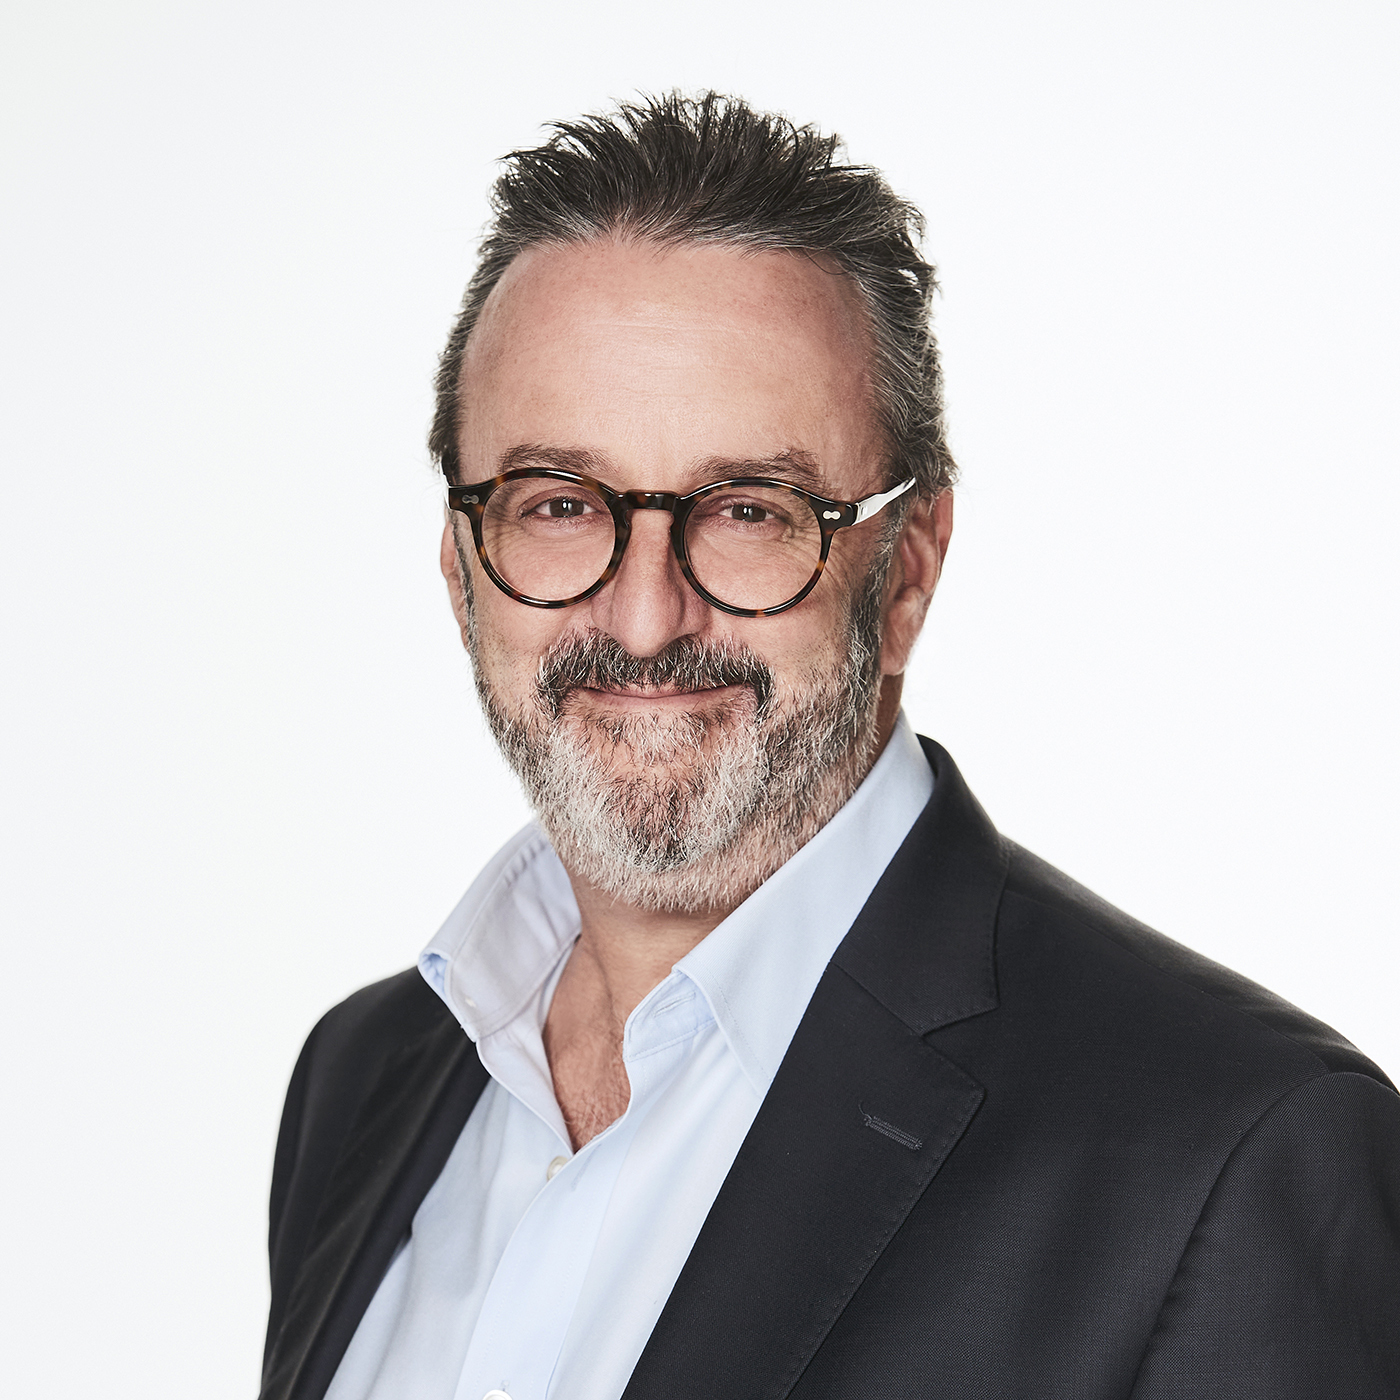 Southern Cross Austereo Chief Sales Officer Brian Gallagher talks 'Boomtown' and Australian radio's growth